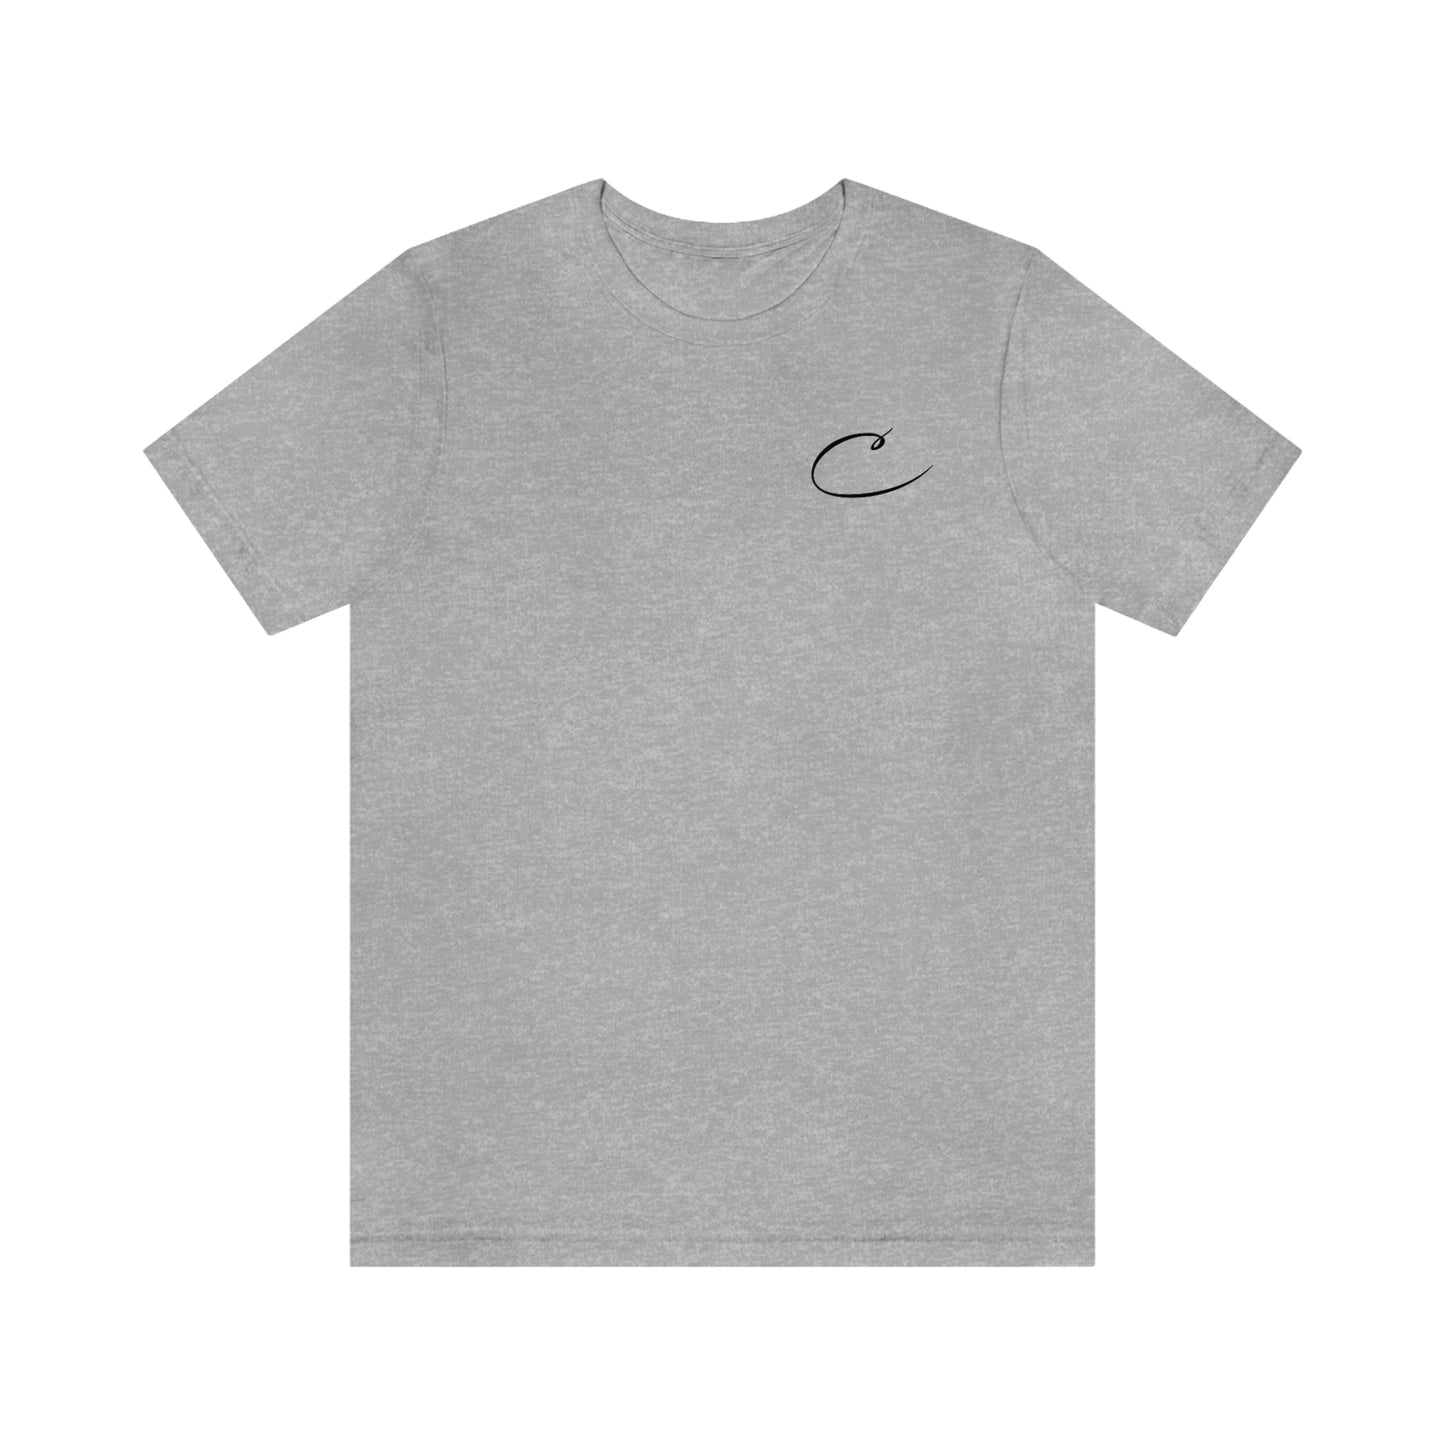 Cate's Exec Cleaning Co Brand Adult Unisex Tee